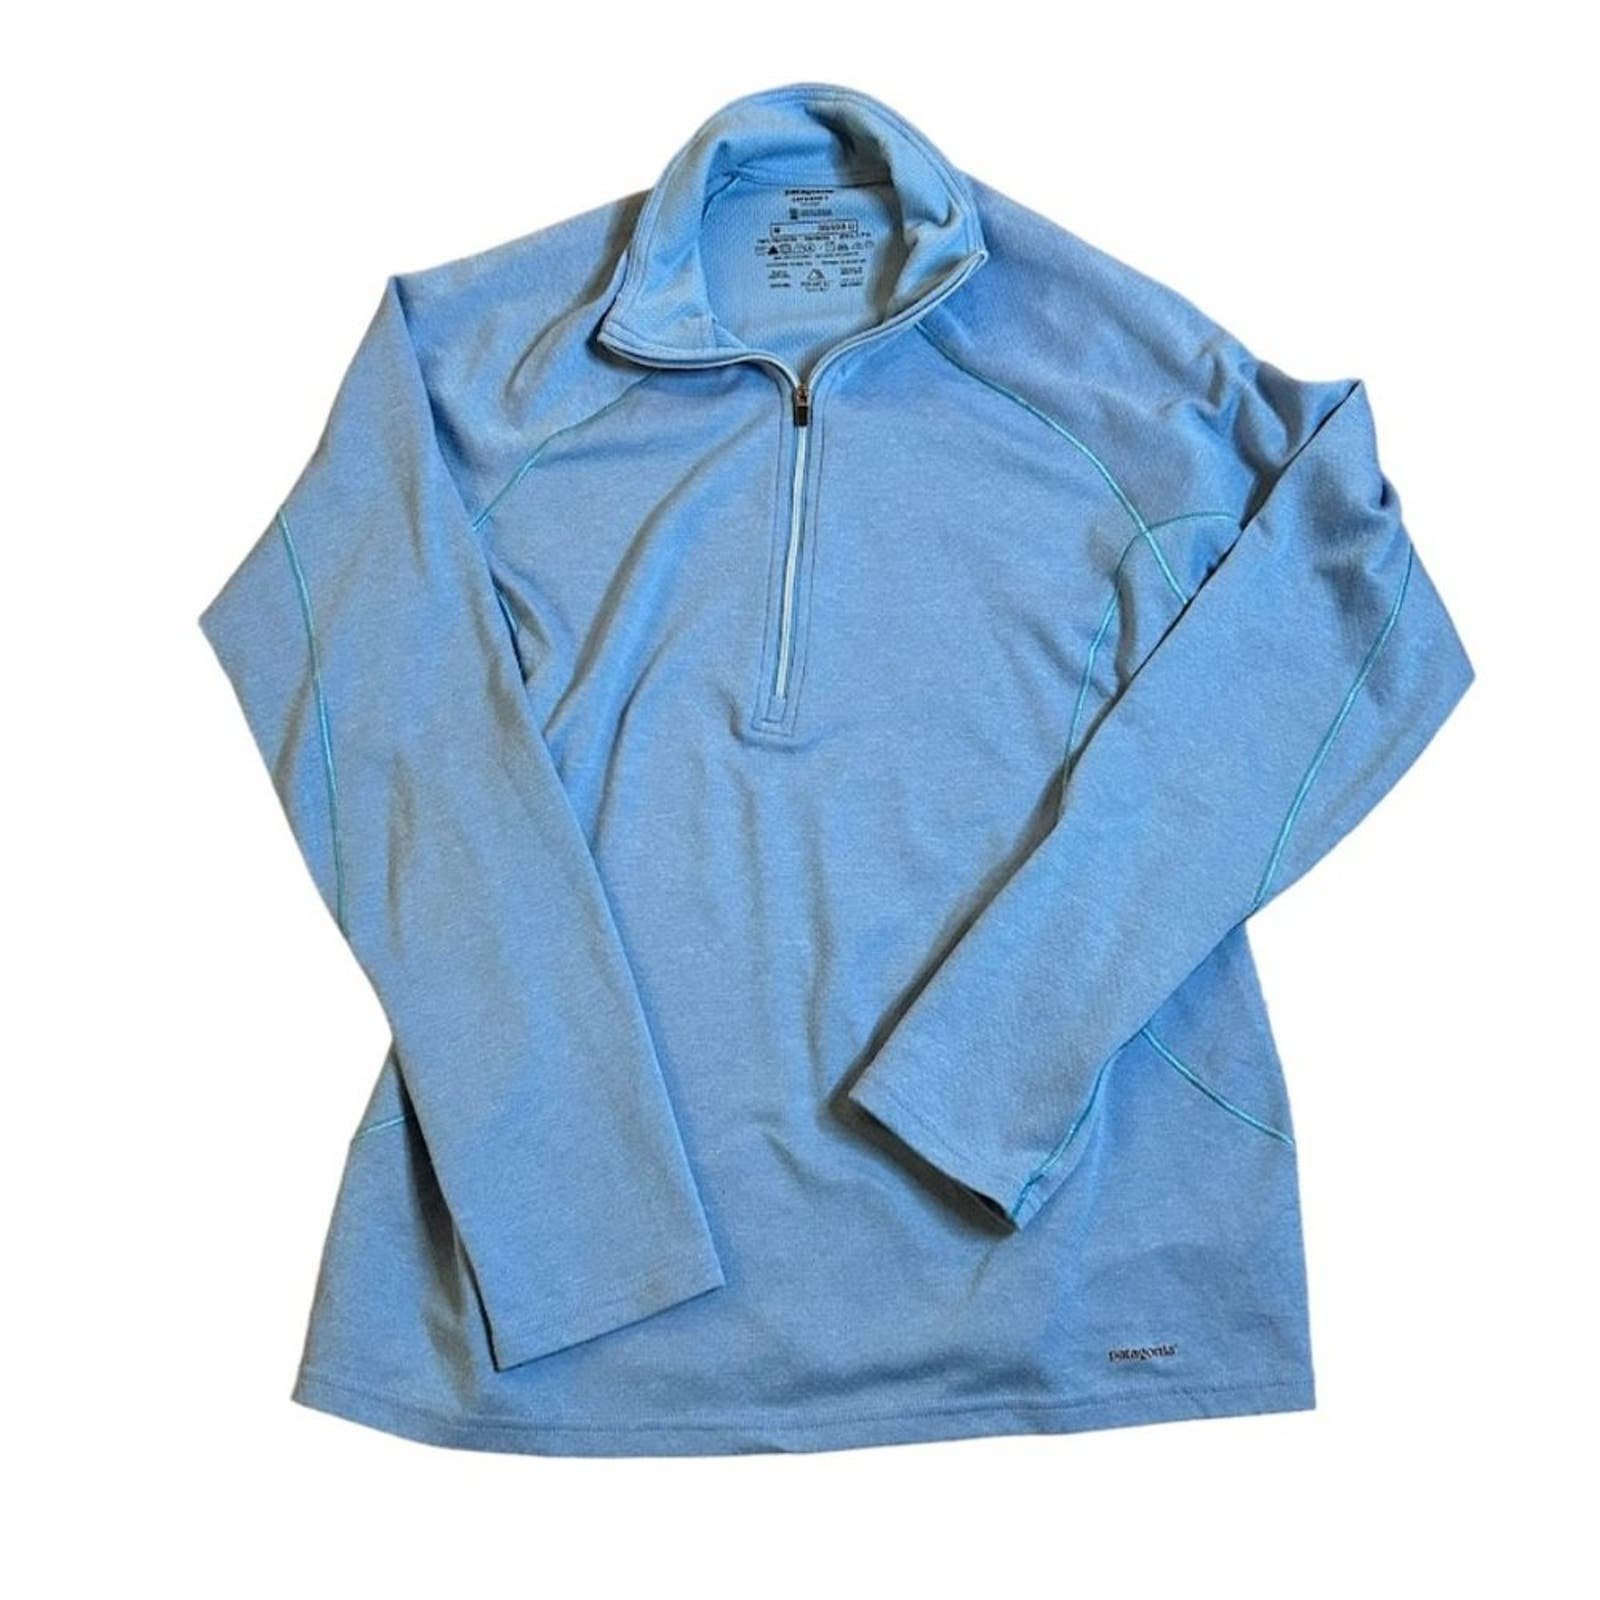 Gorgeous Patagonia Capilene 3 Midweight Zip Neck Base Layer Top Women´s Size Medium Blue MN6ZpMslY Discount